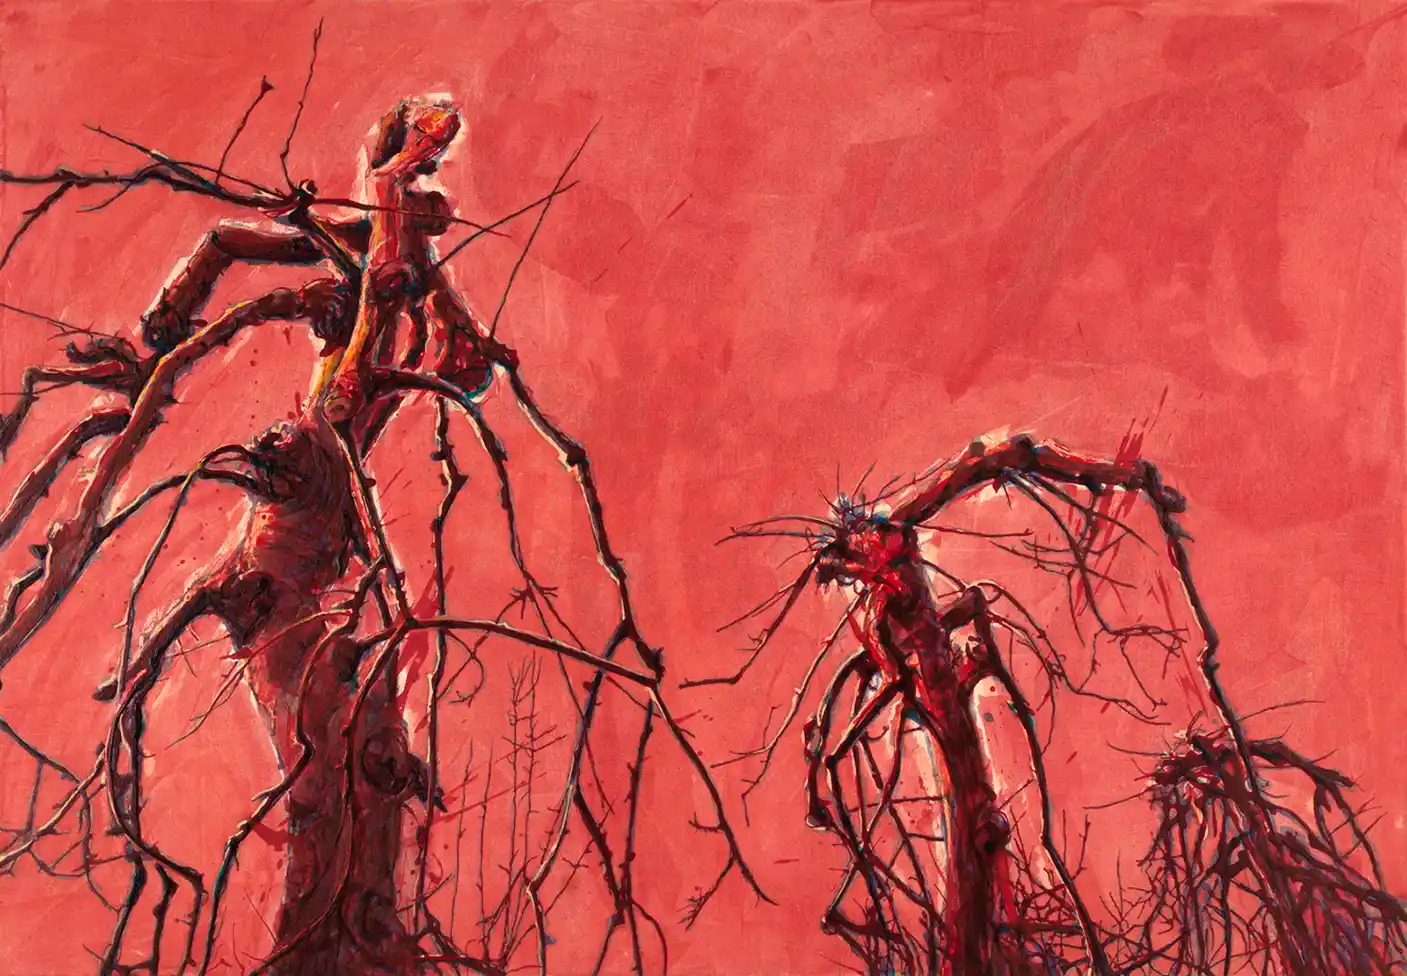 Exclusive Contemporary Image: Acrylic Painting Red Tree - Metropolitan Museum of Art Private Collection
